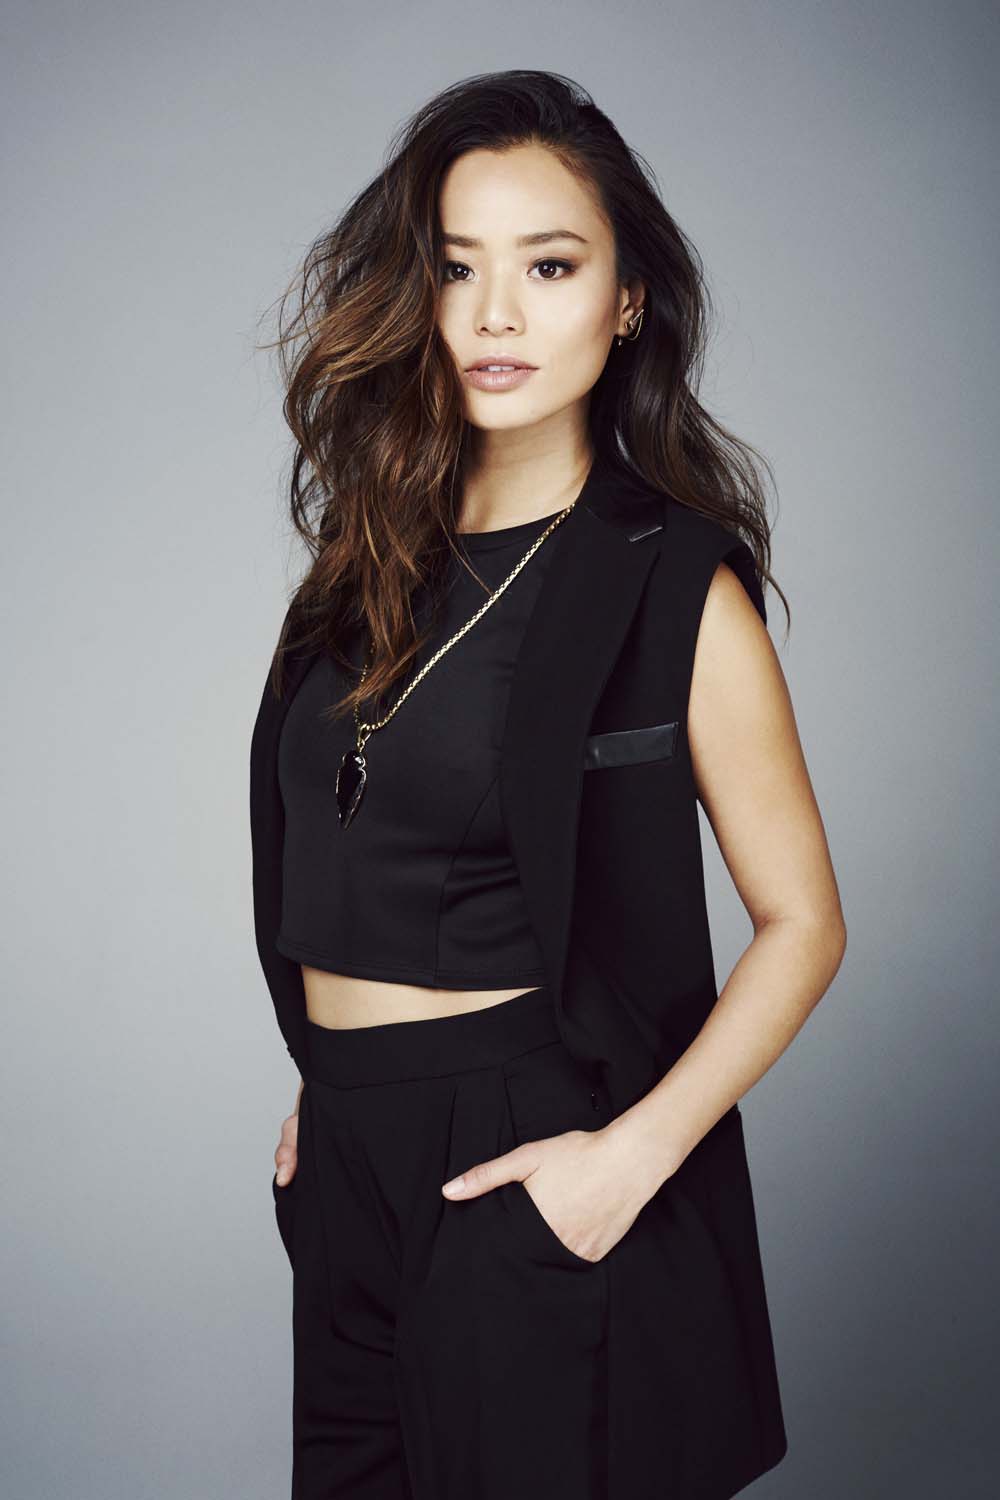 Jamie Chung, actress and creator of whatthechung.com